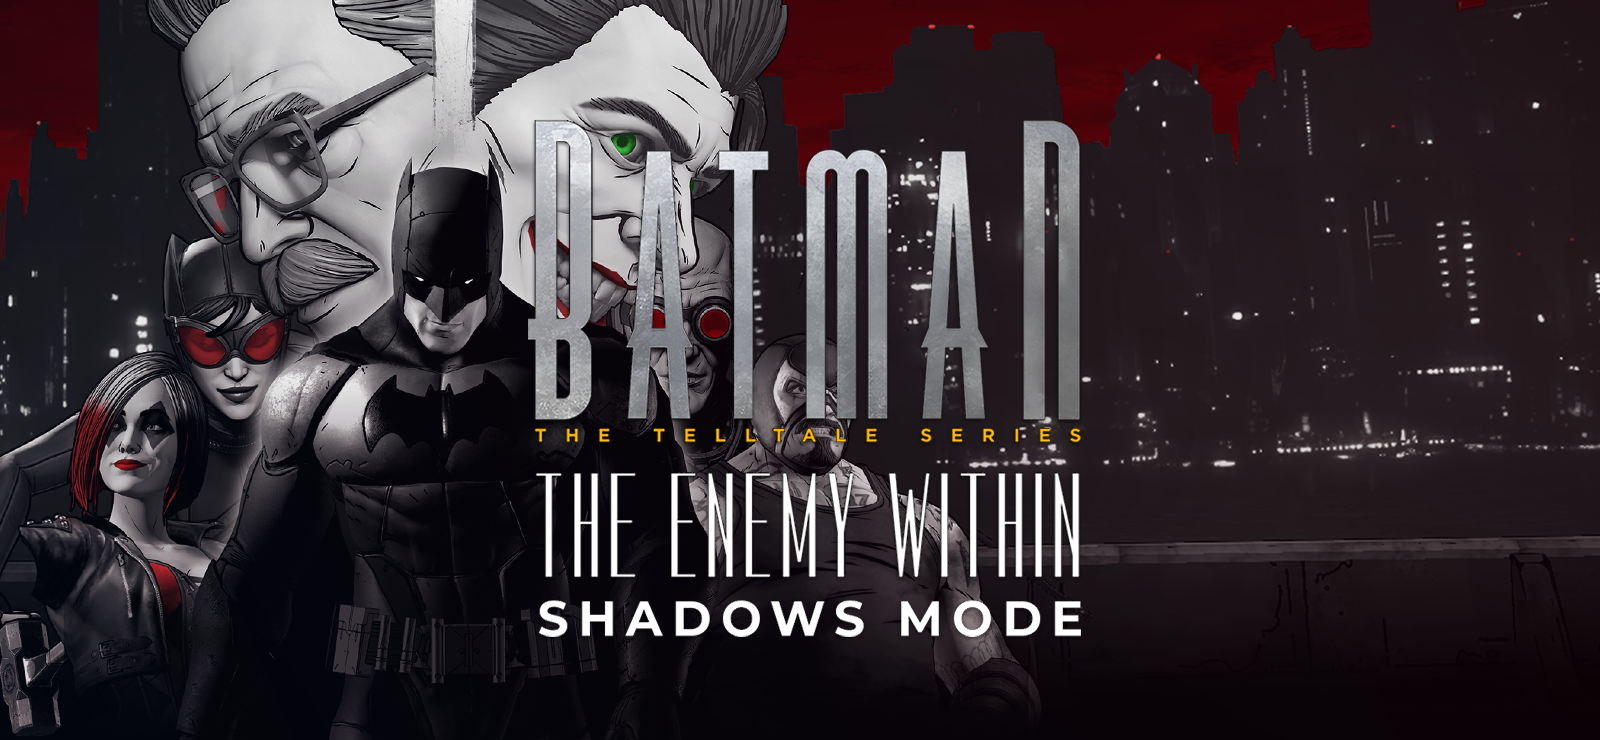 Batman Shadows Mode: The Enemy Within